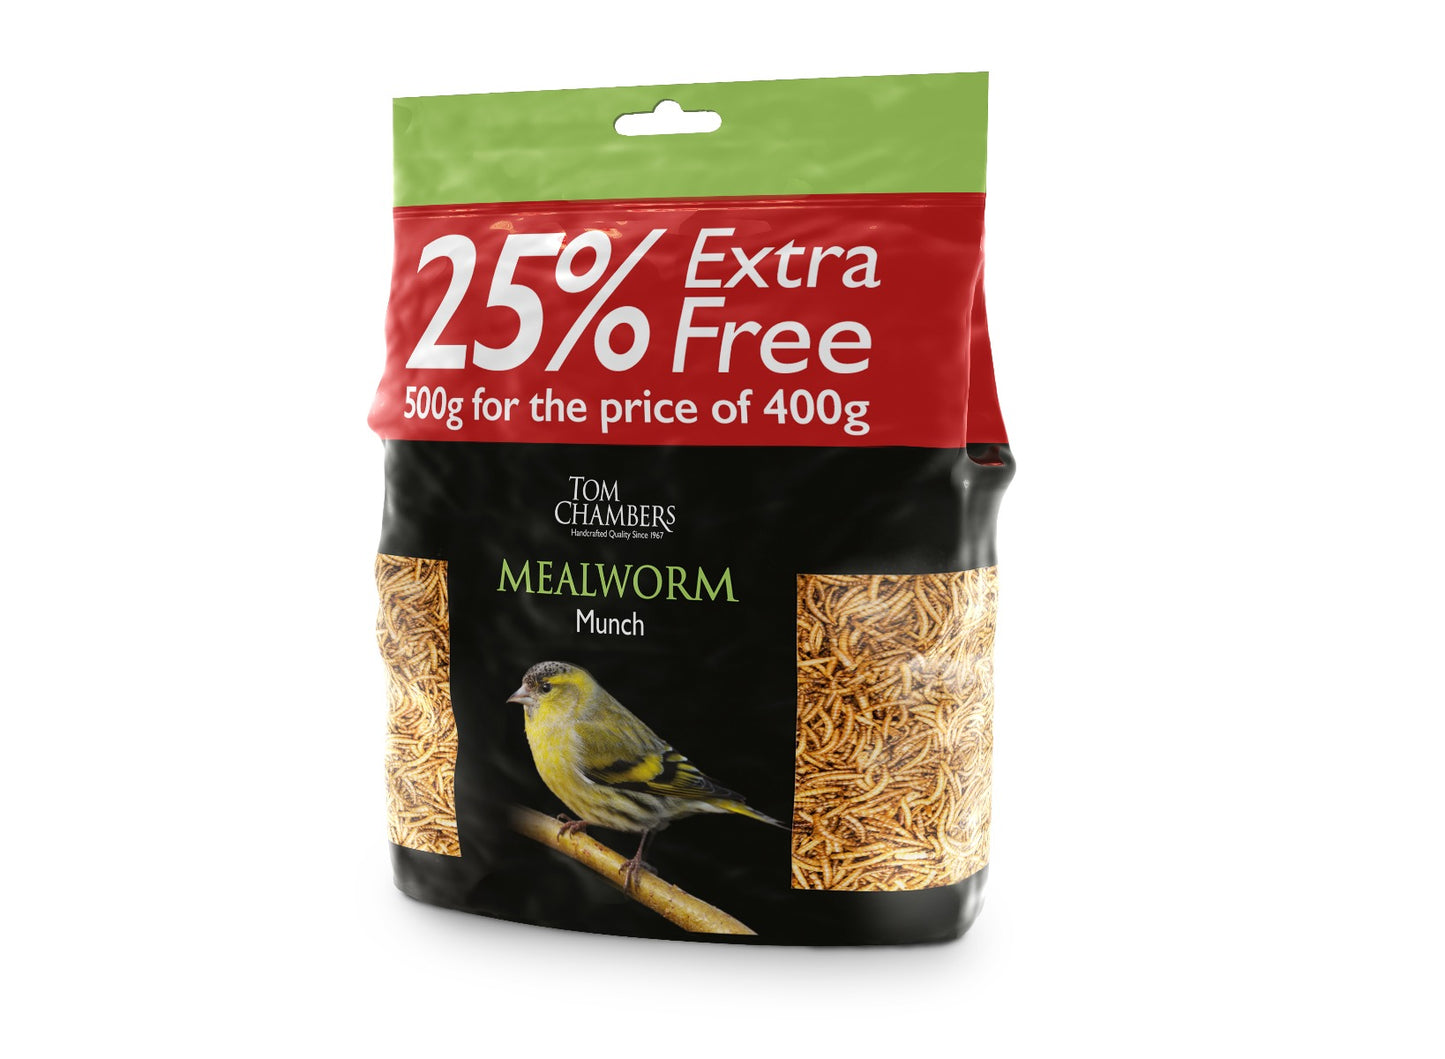 Tom Chambers Mealworm Munch 400g